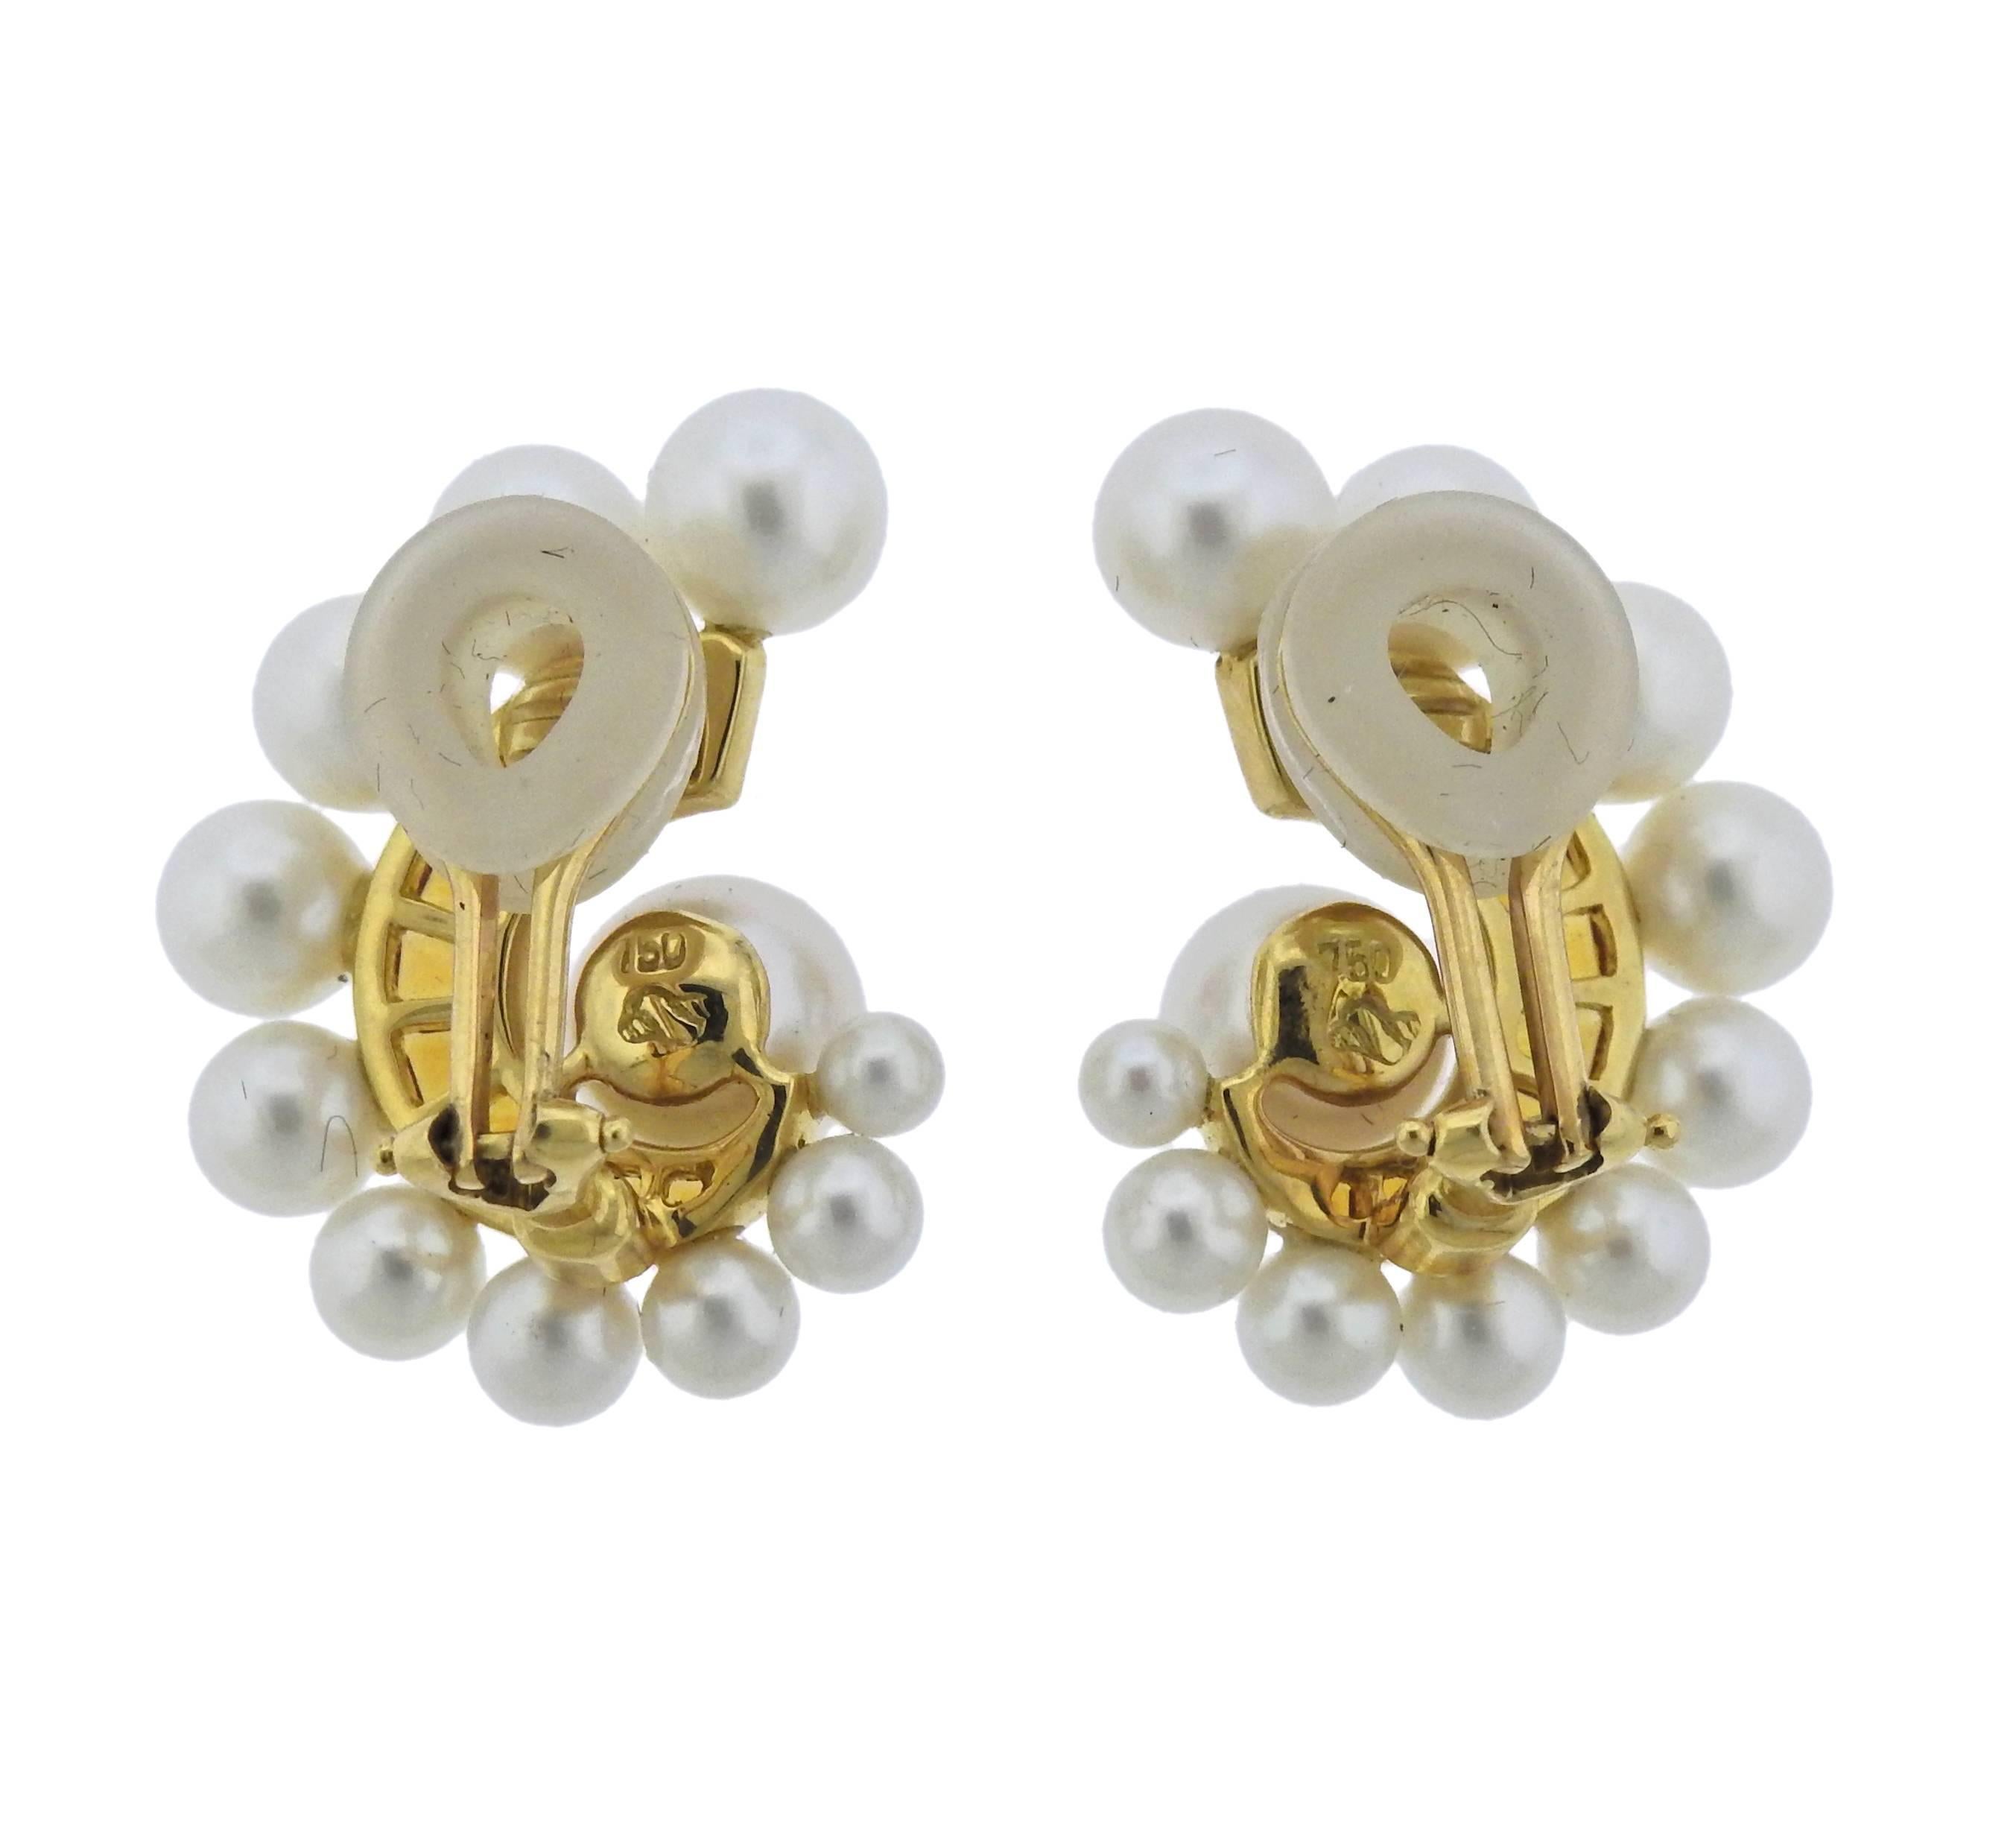 18k yellow gold swirl earrings, crafted by Seaman Schepps, set with 3mm to 7mm pearls and citrines. Earrings are 25mm x 18mm, weight is 11 grams. Marked 750, Shell mark.